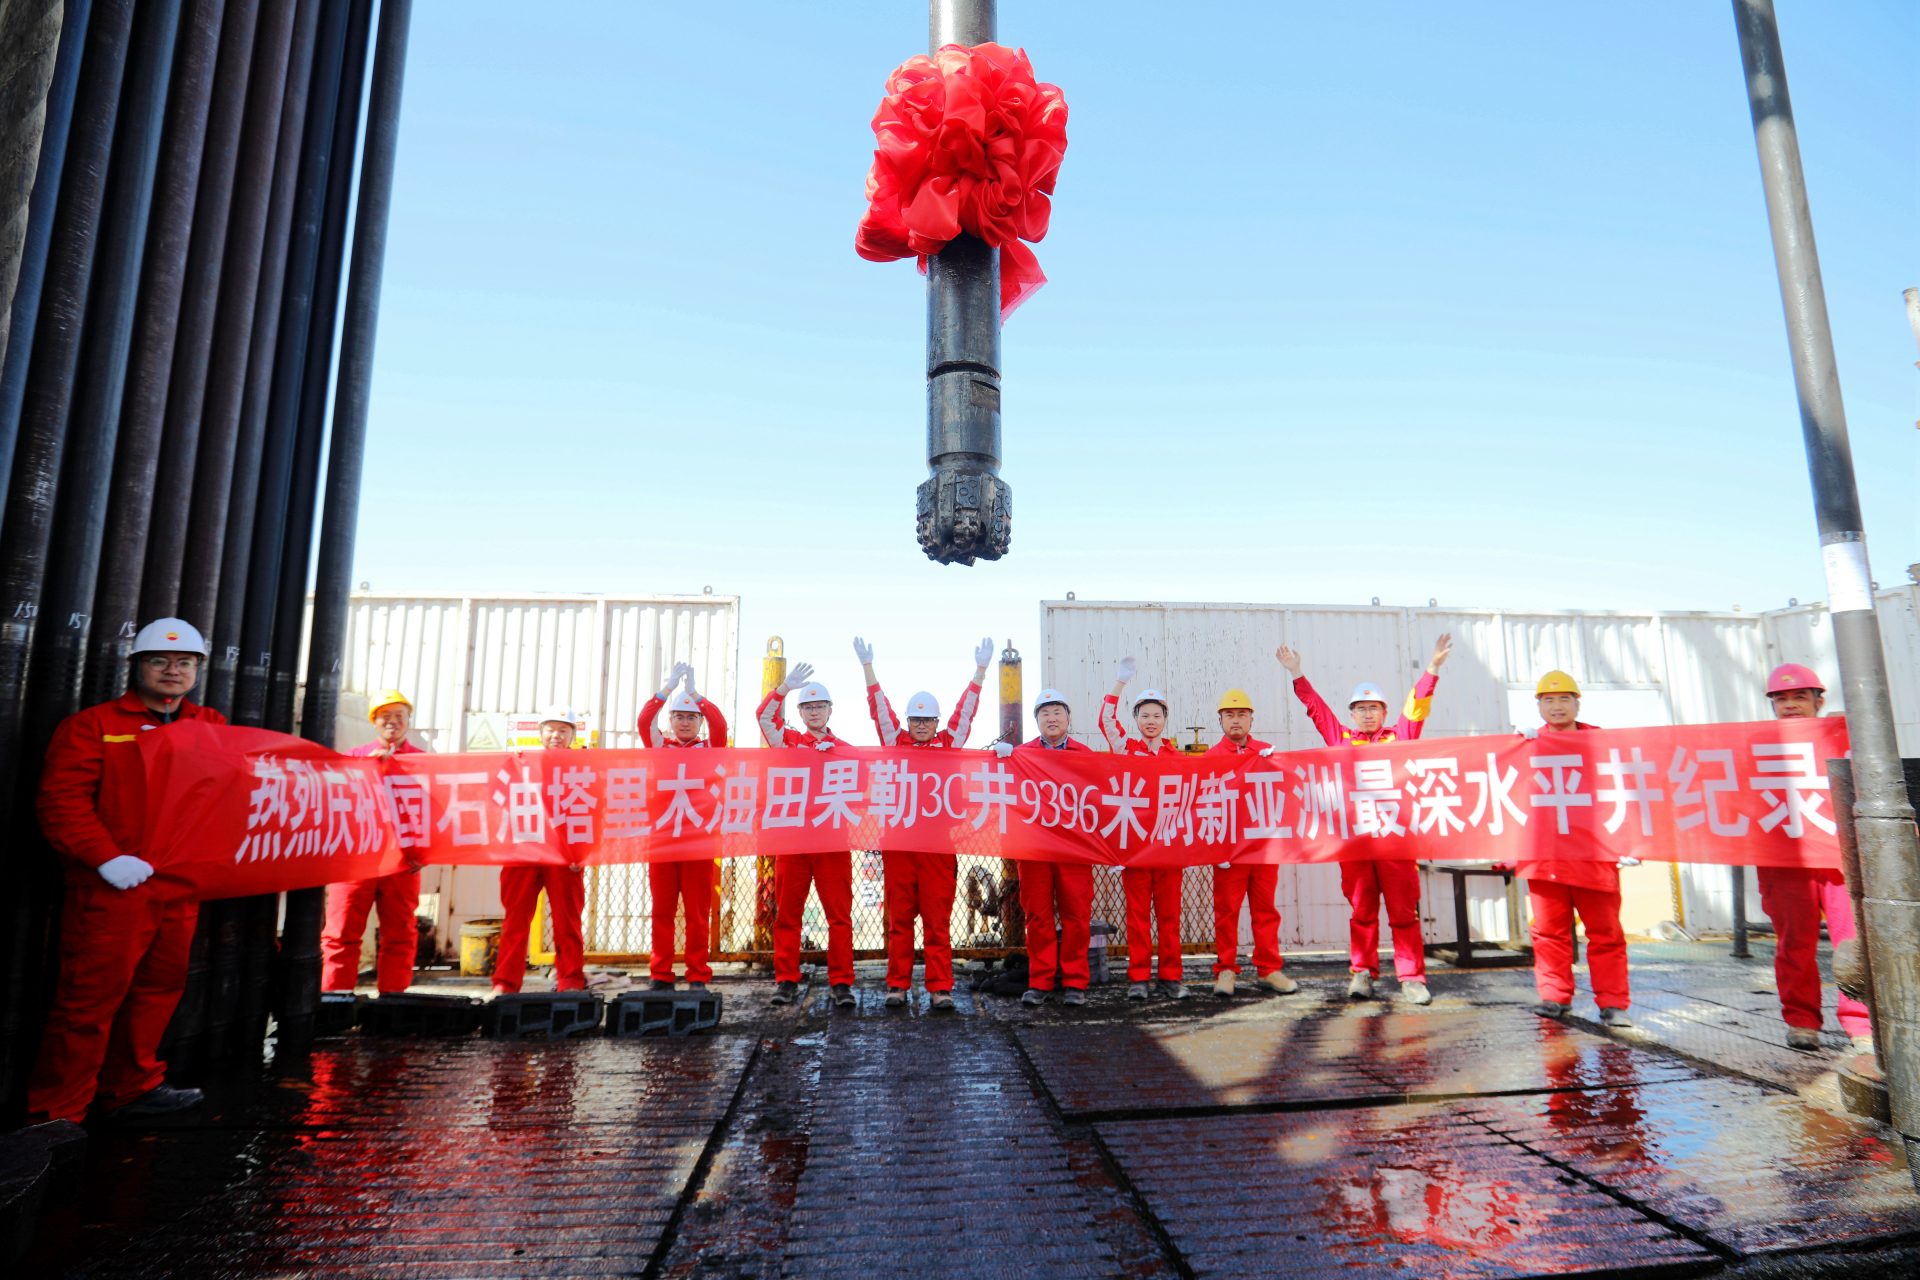 Why did China drill a borehole more than thirty thousand feet deep?